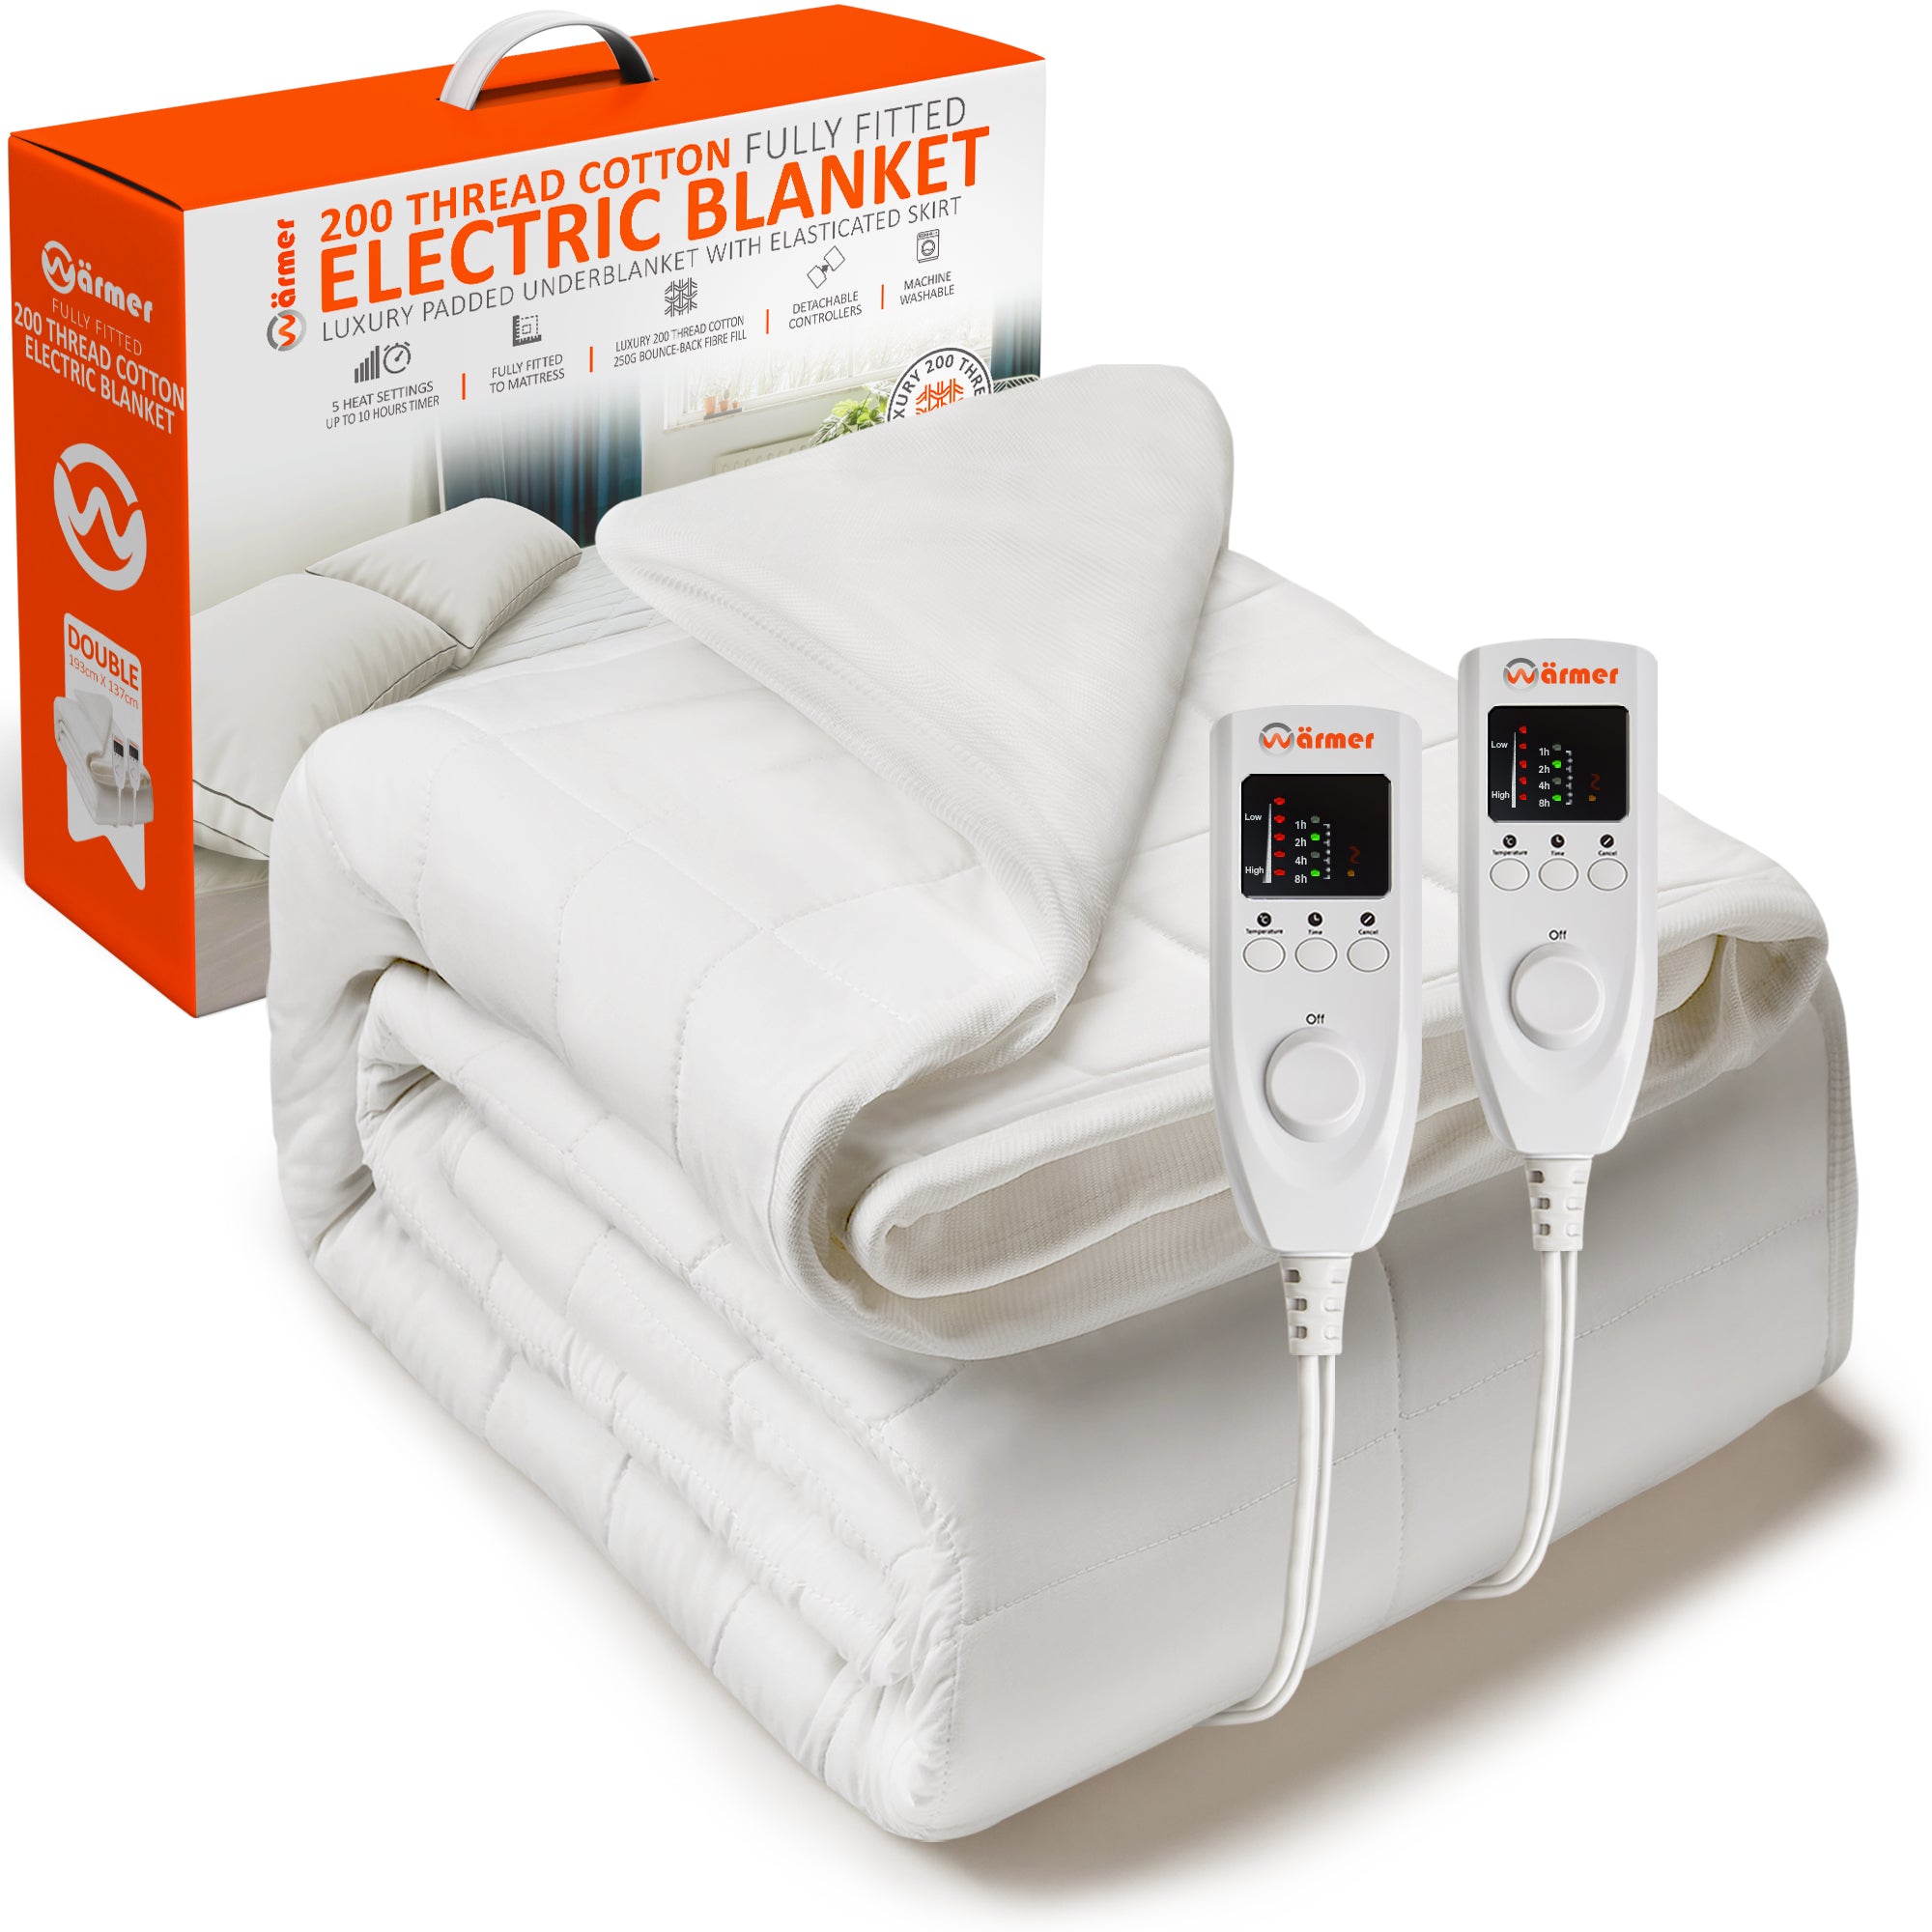 Electric Blanket Heated Washable Timer Under Luxury Single Double Usual 